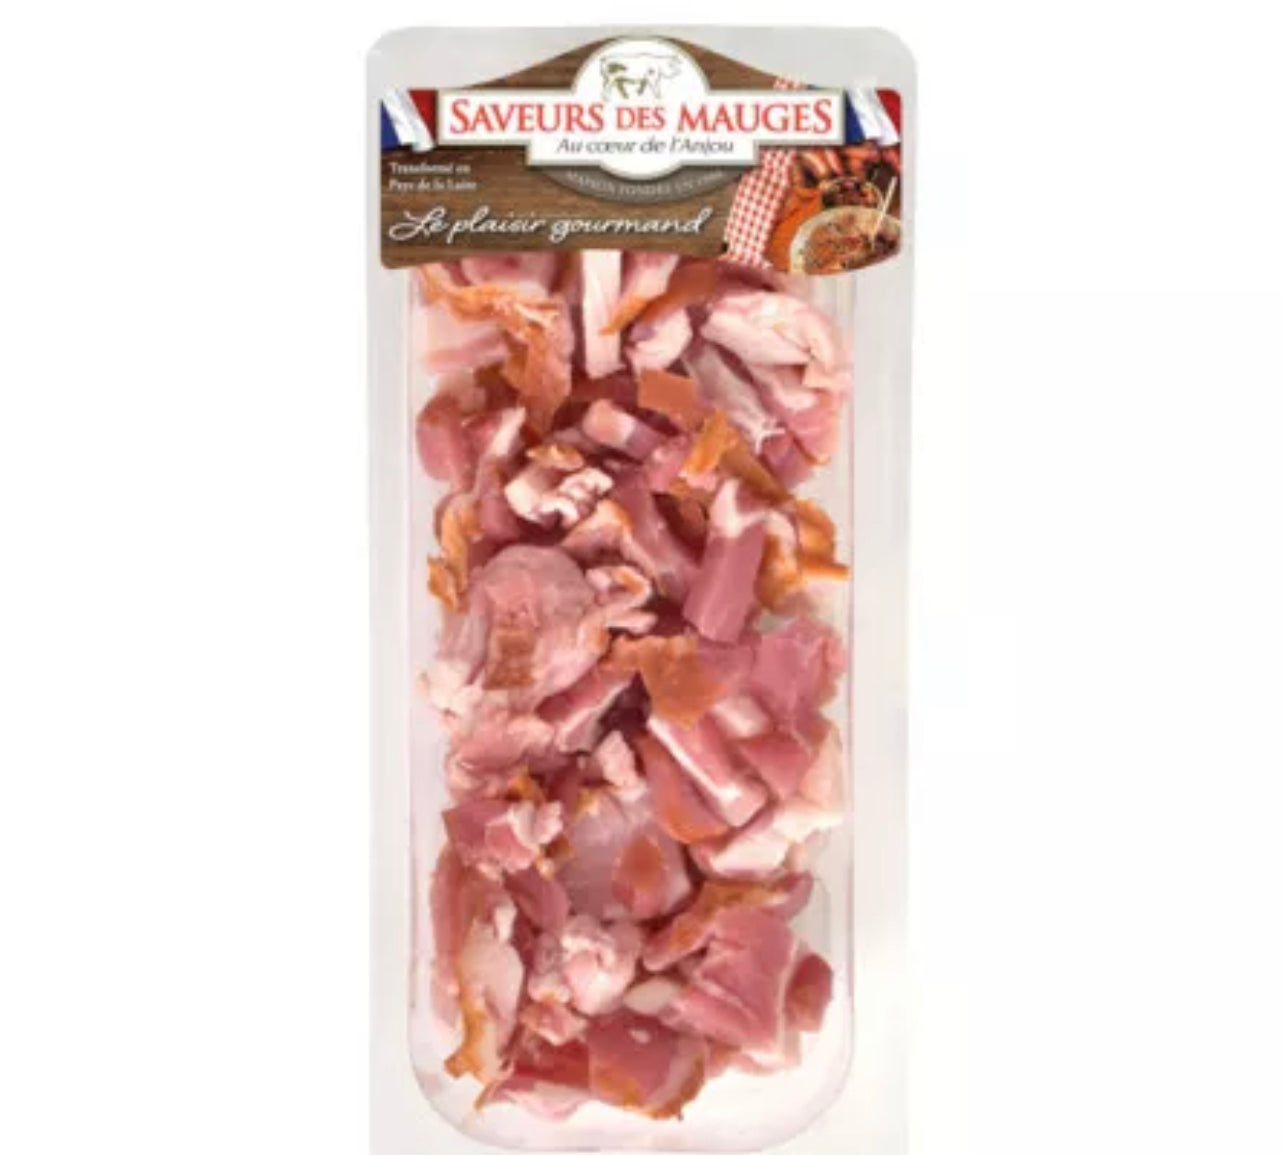 Old-fashioned smoked bacon LPF 200g